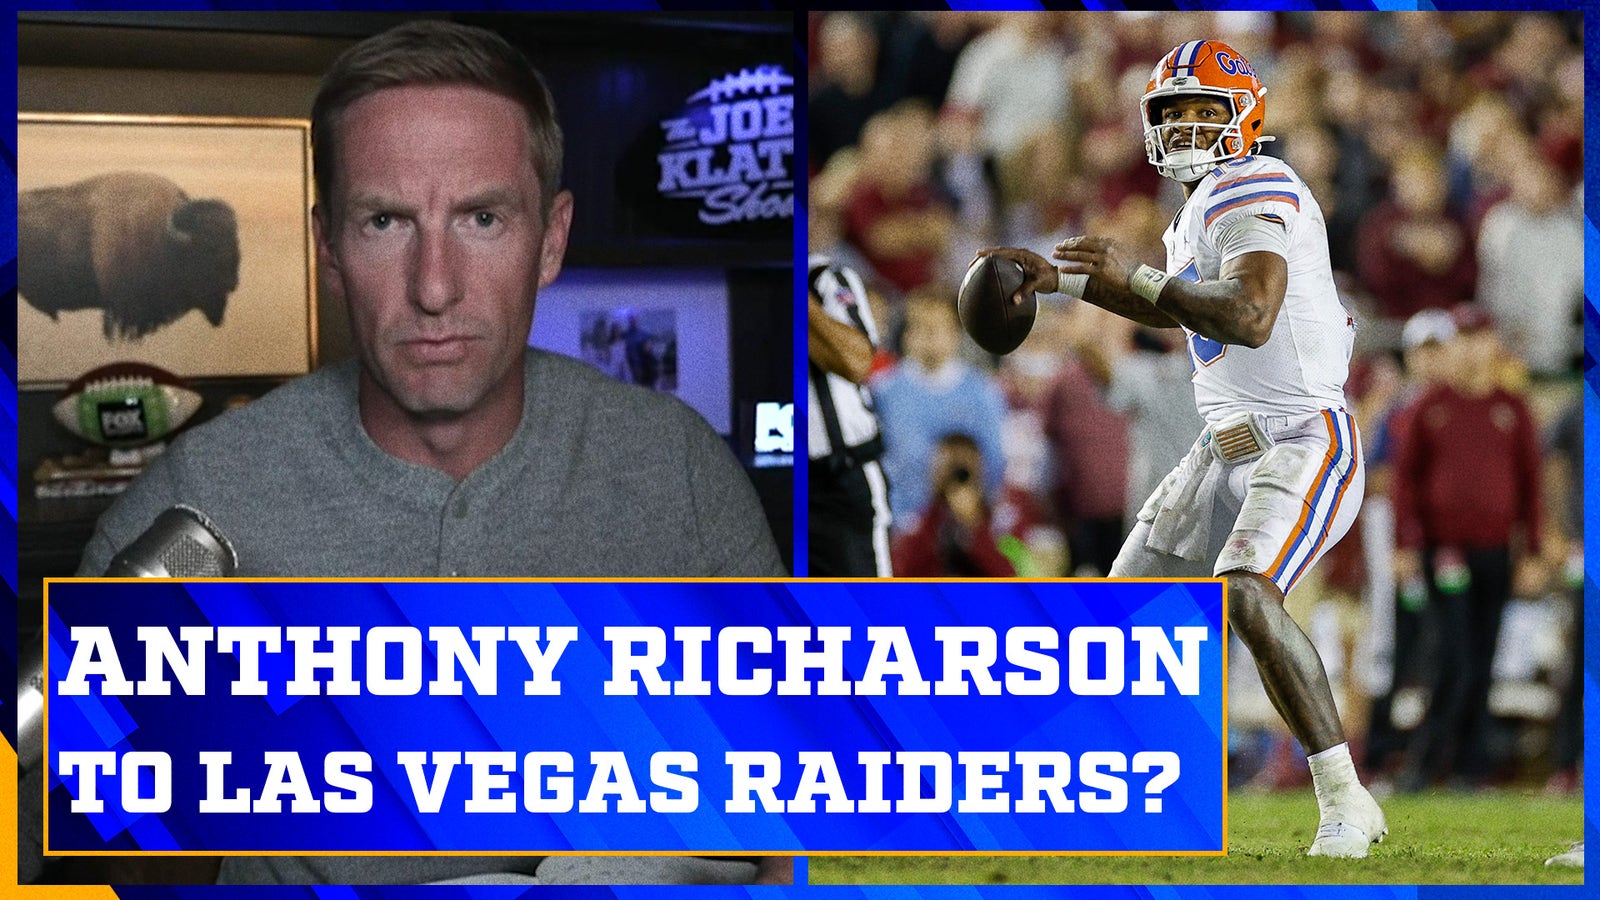 Where would Anthony Richardson fit best?